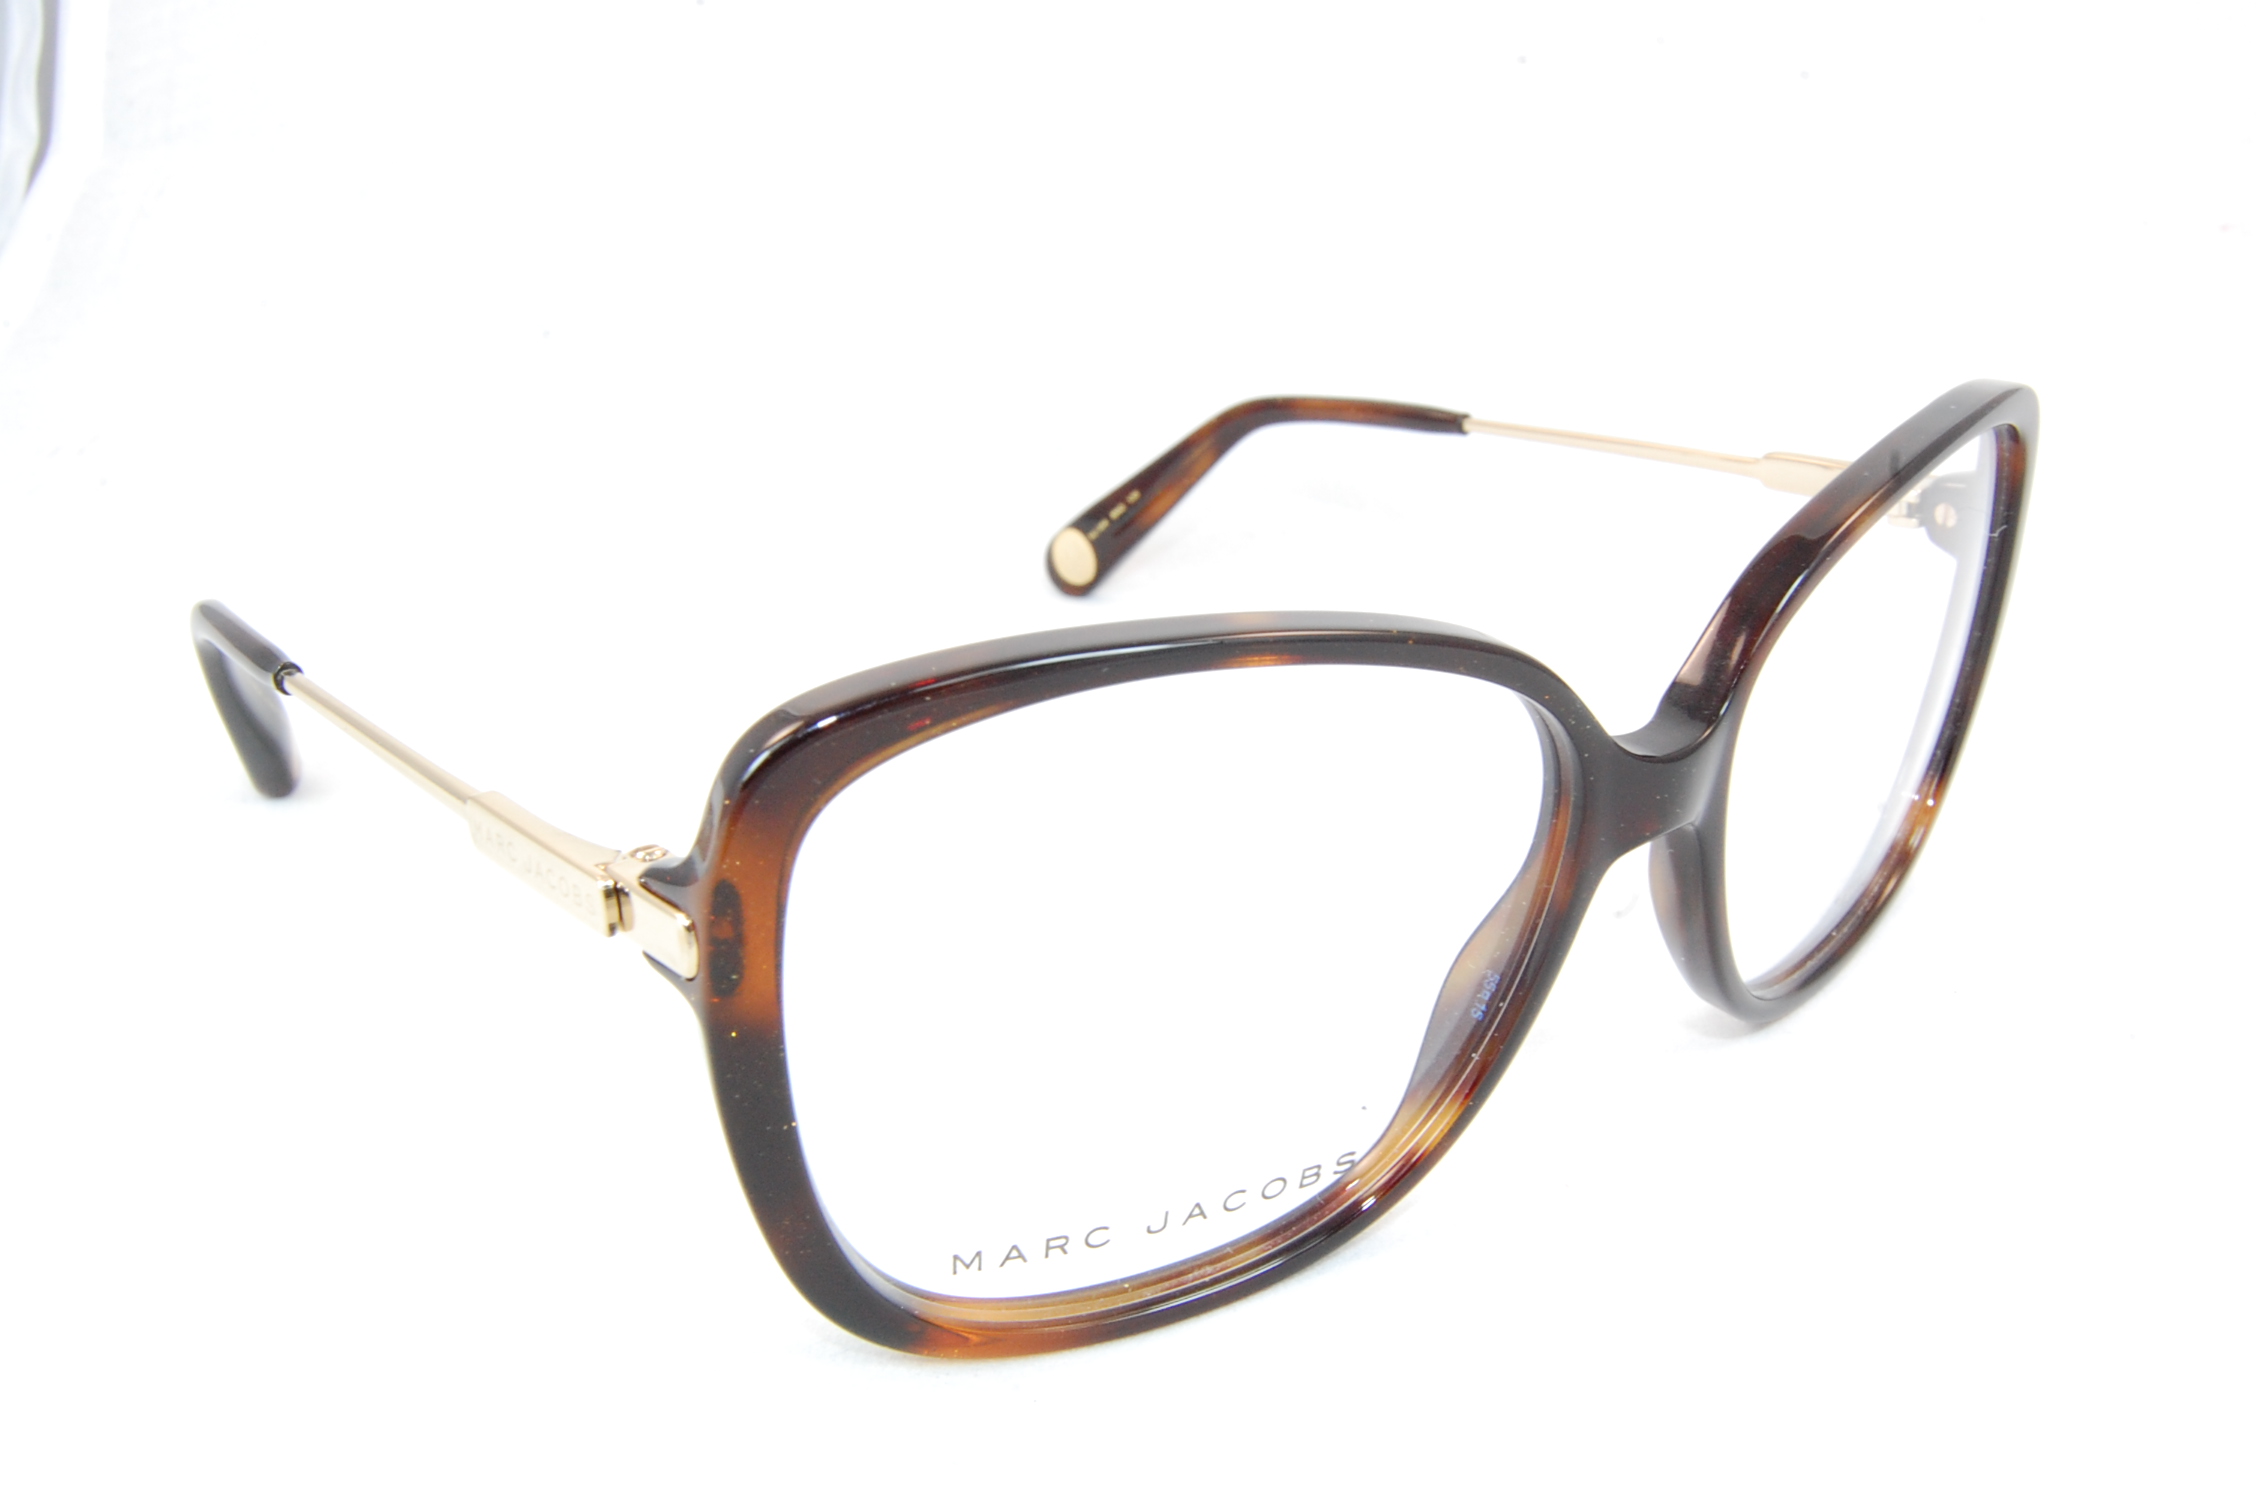 MARC JACOBS OPTIQUE 10/10 FACHES THUMESNIL